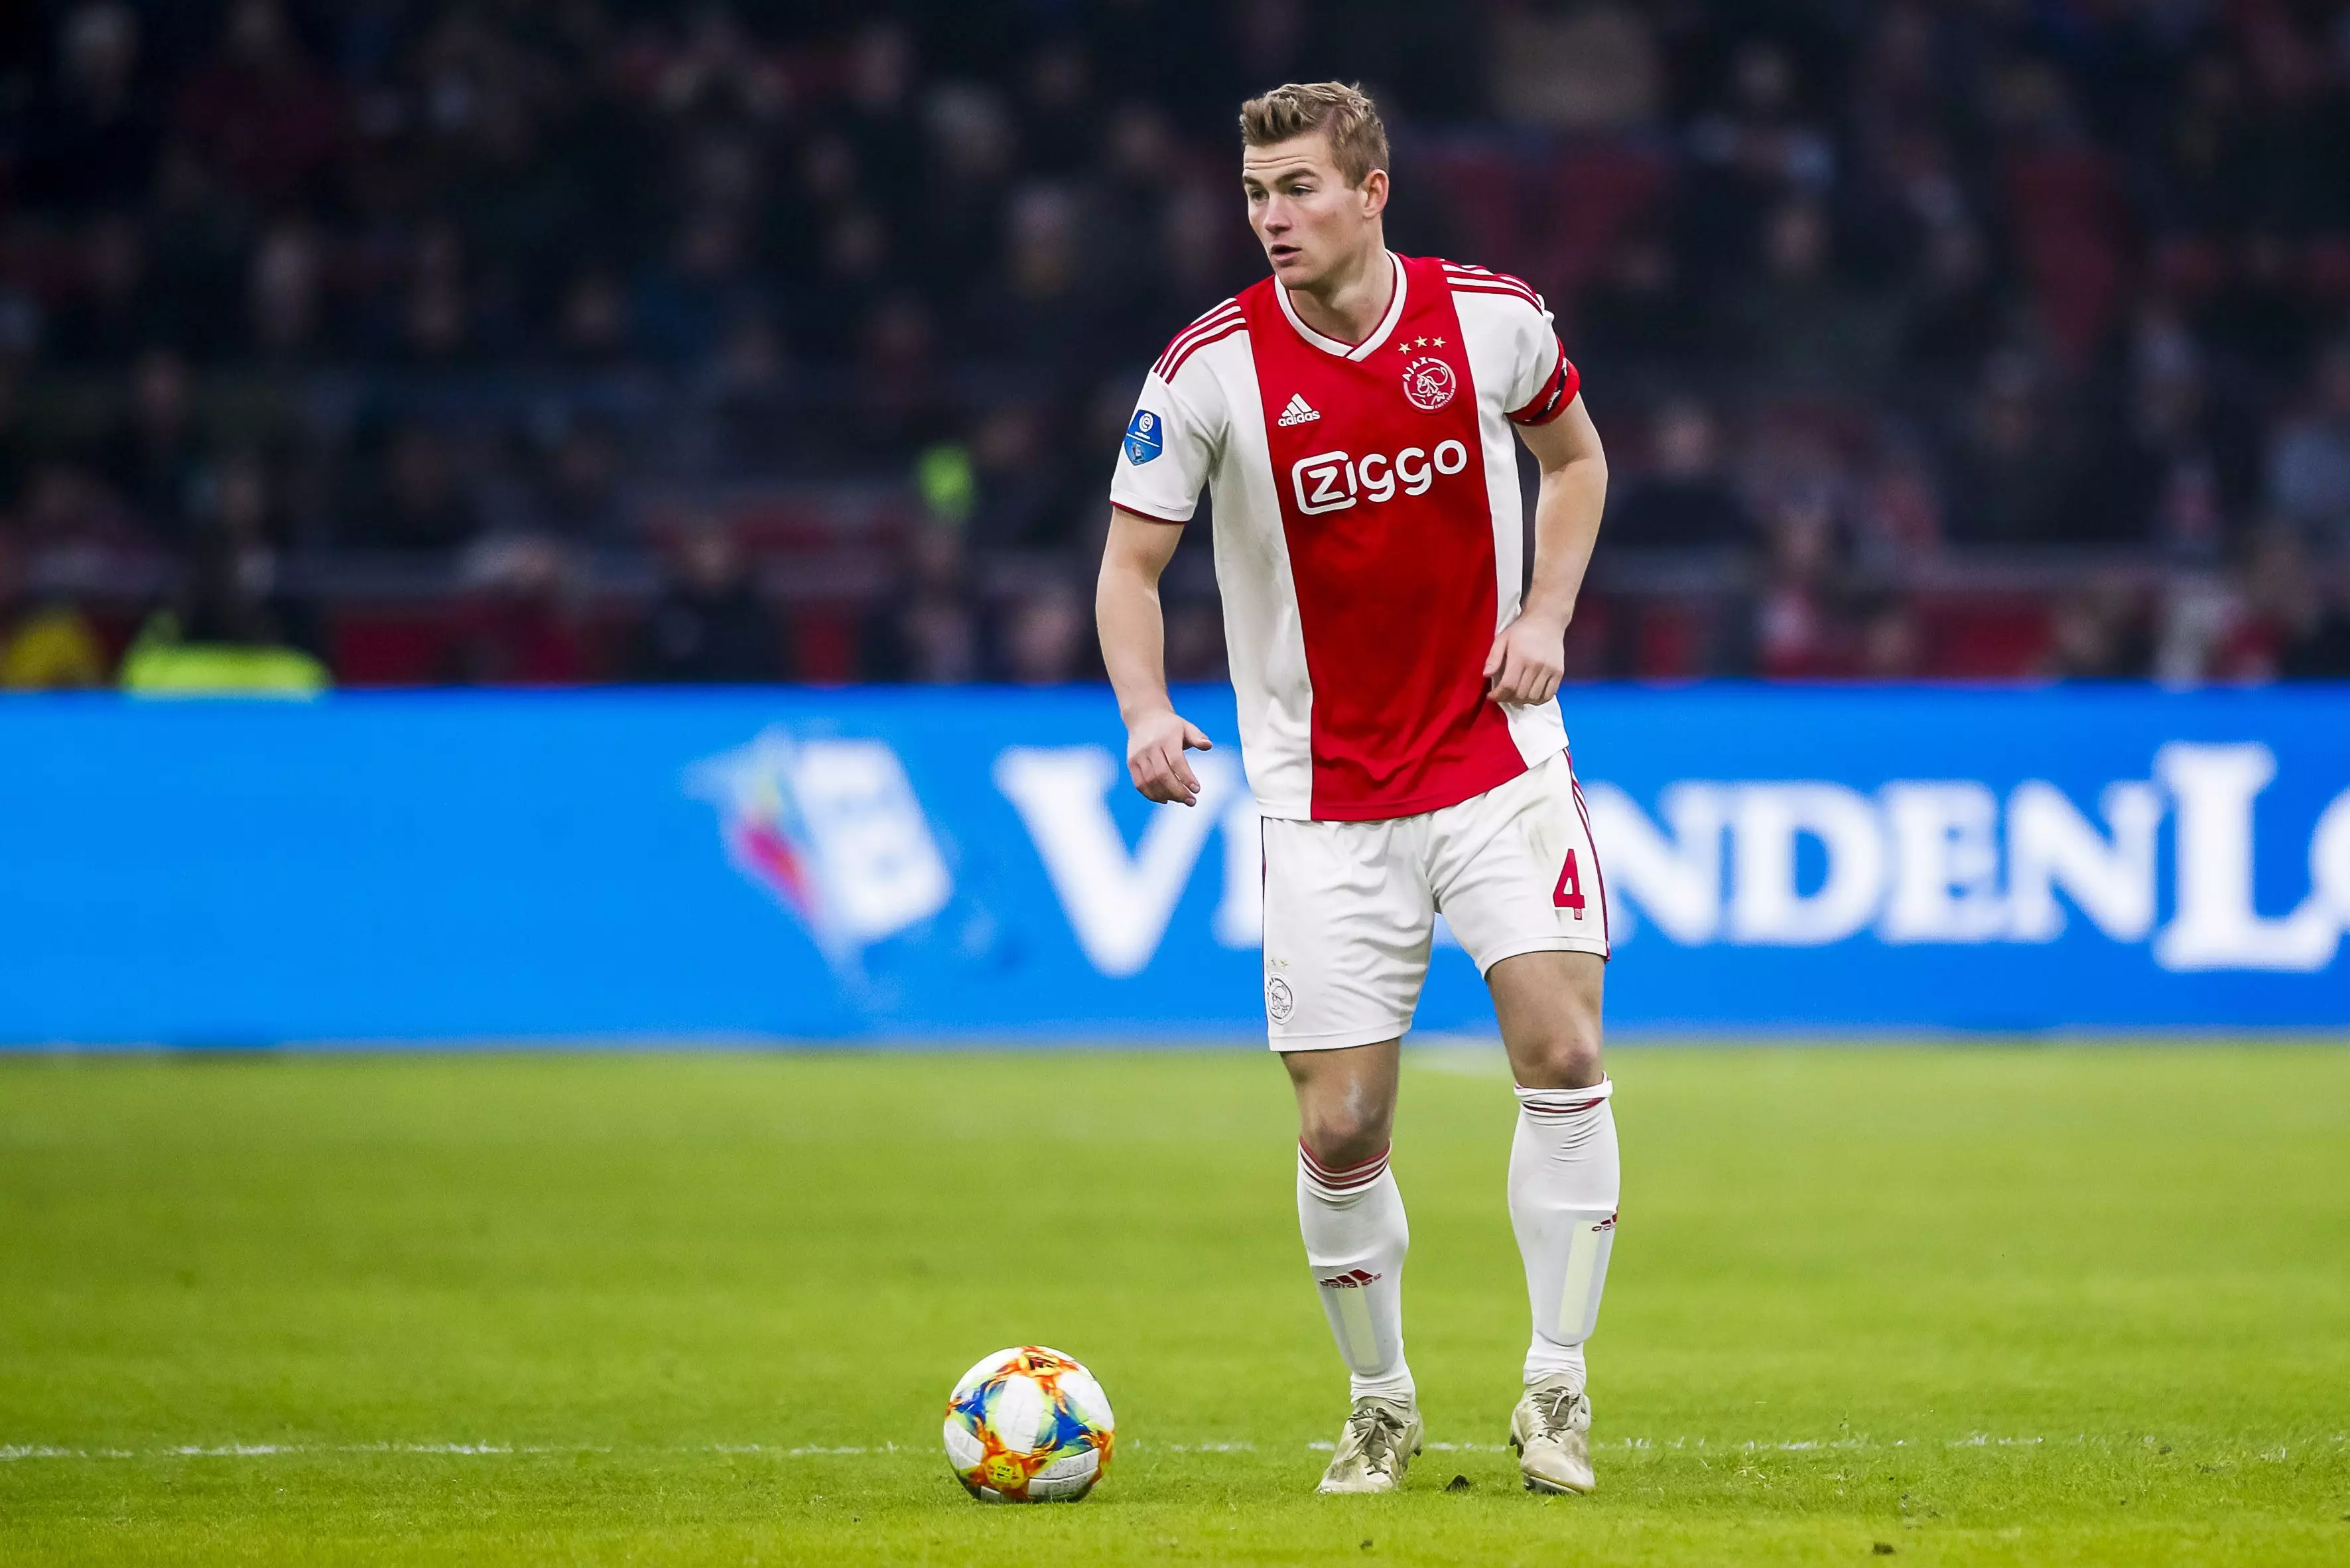 He's been de Ligt-ing up the Johan Cruyff Arena. Image: PA Images